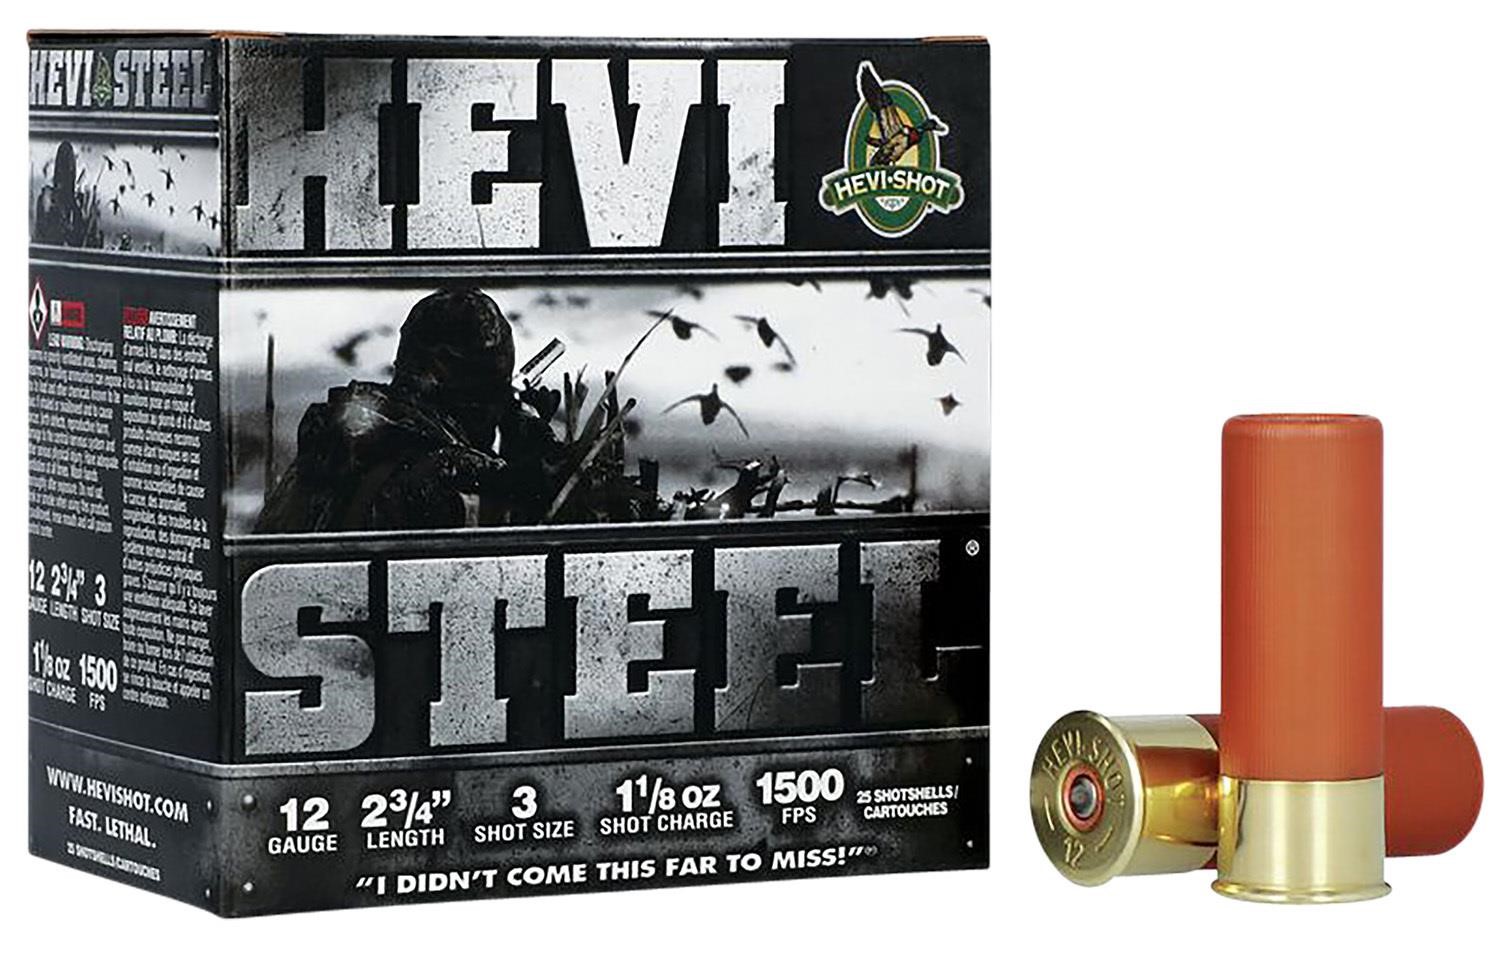 The Huge Ammo Auction